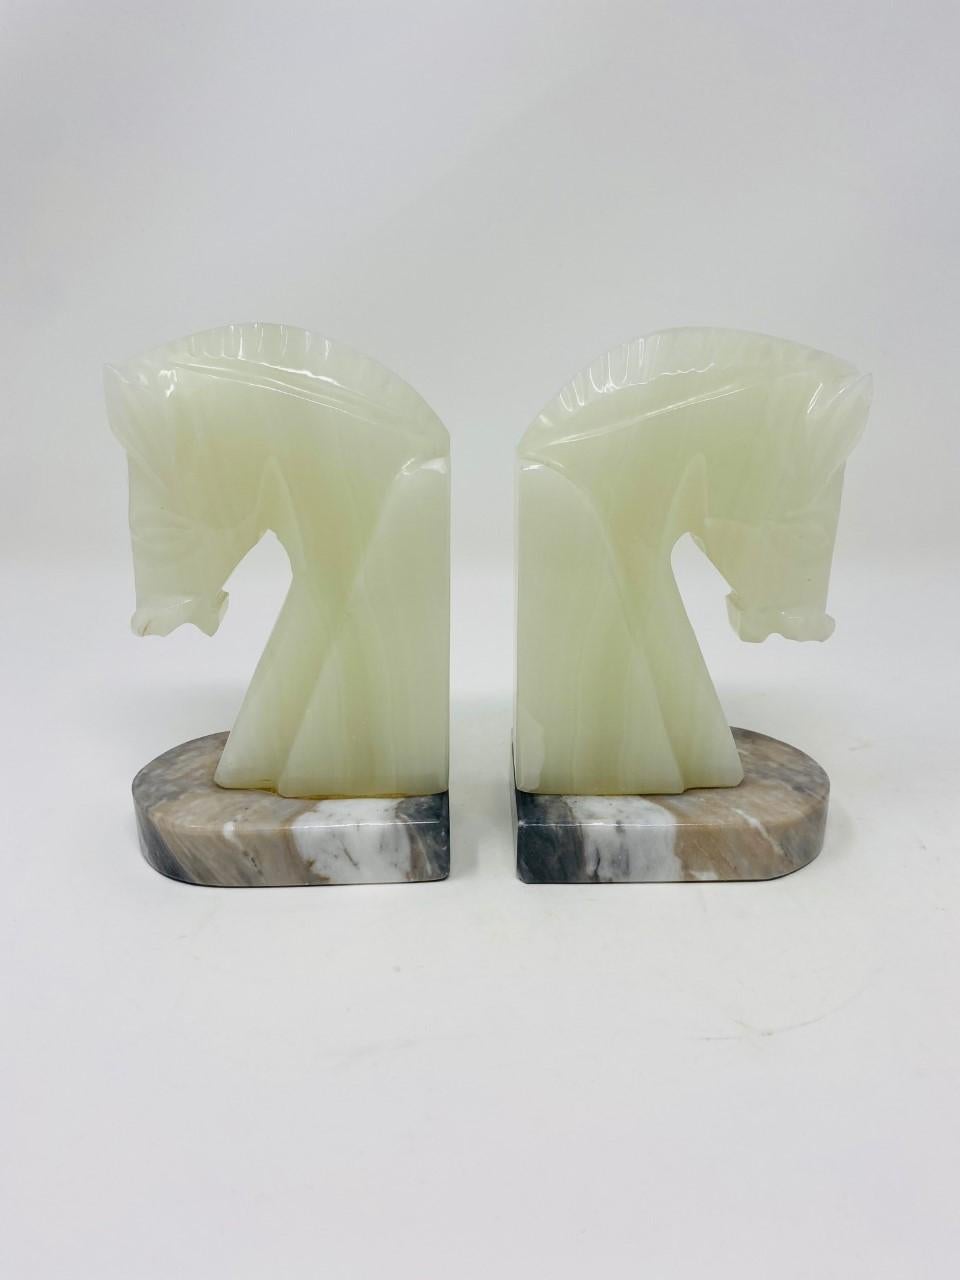 20th Century Pair of Midcentury Marble Horse Head Bookends